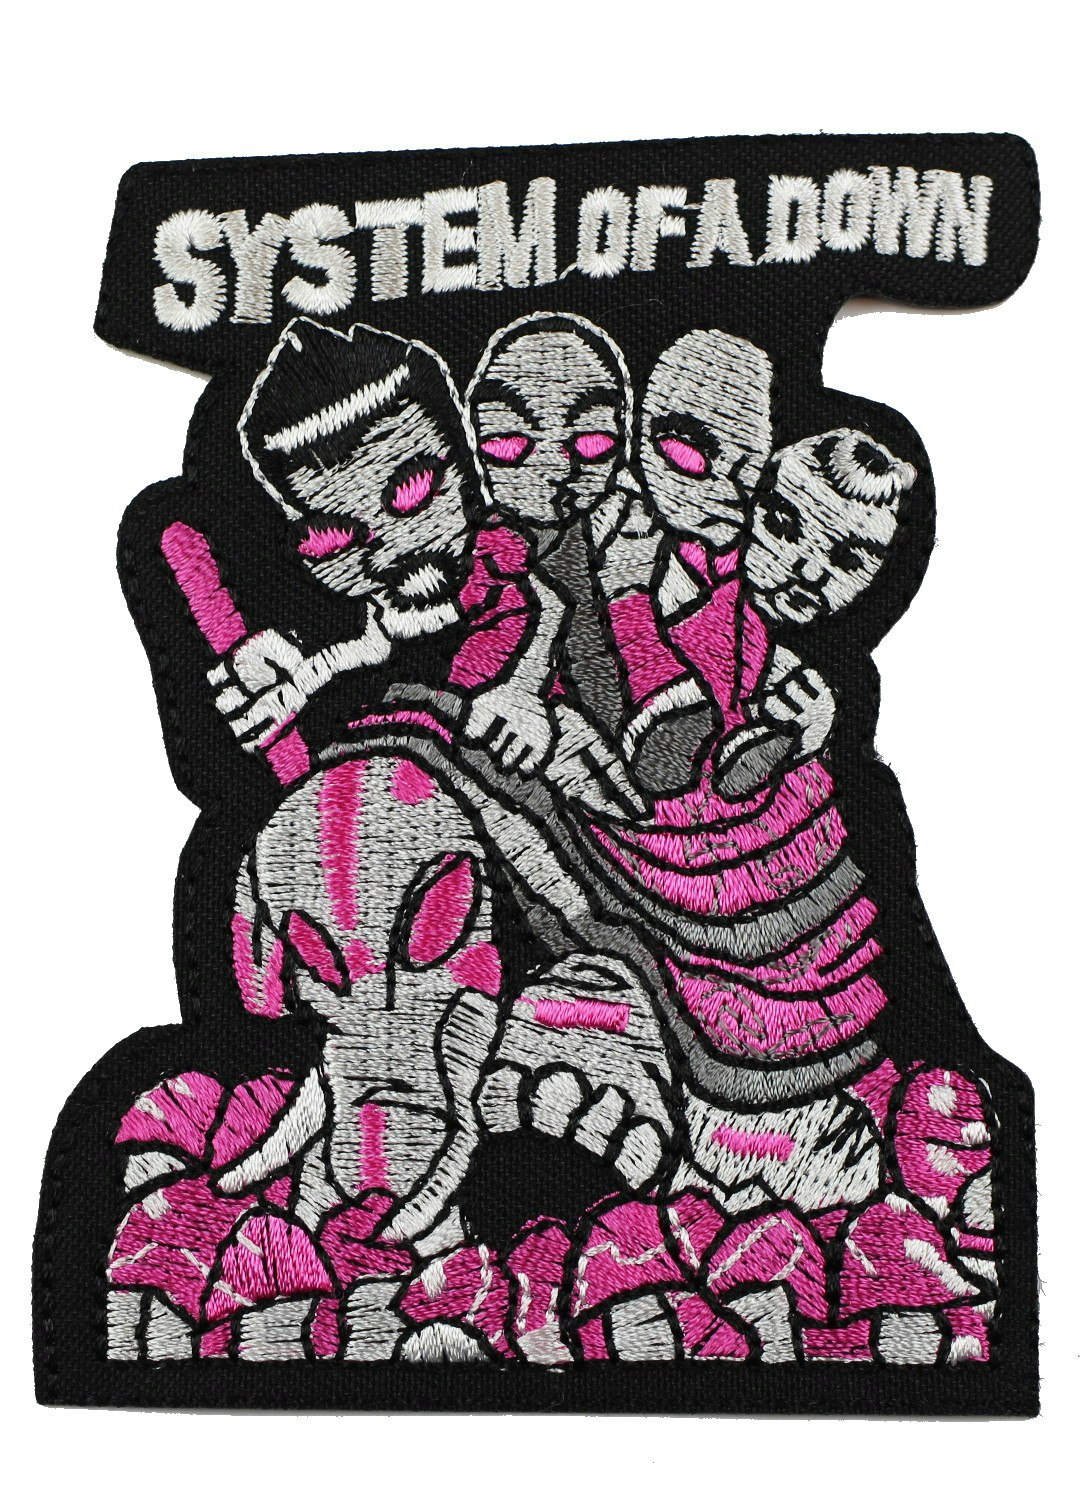 System of a down logo patch